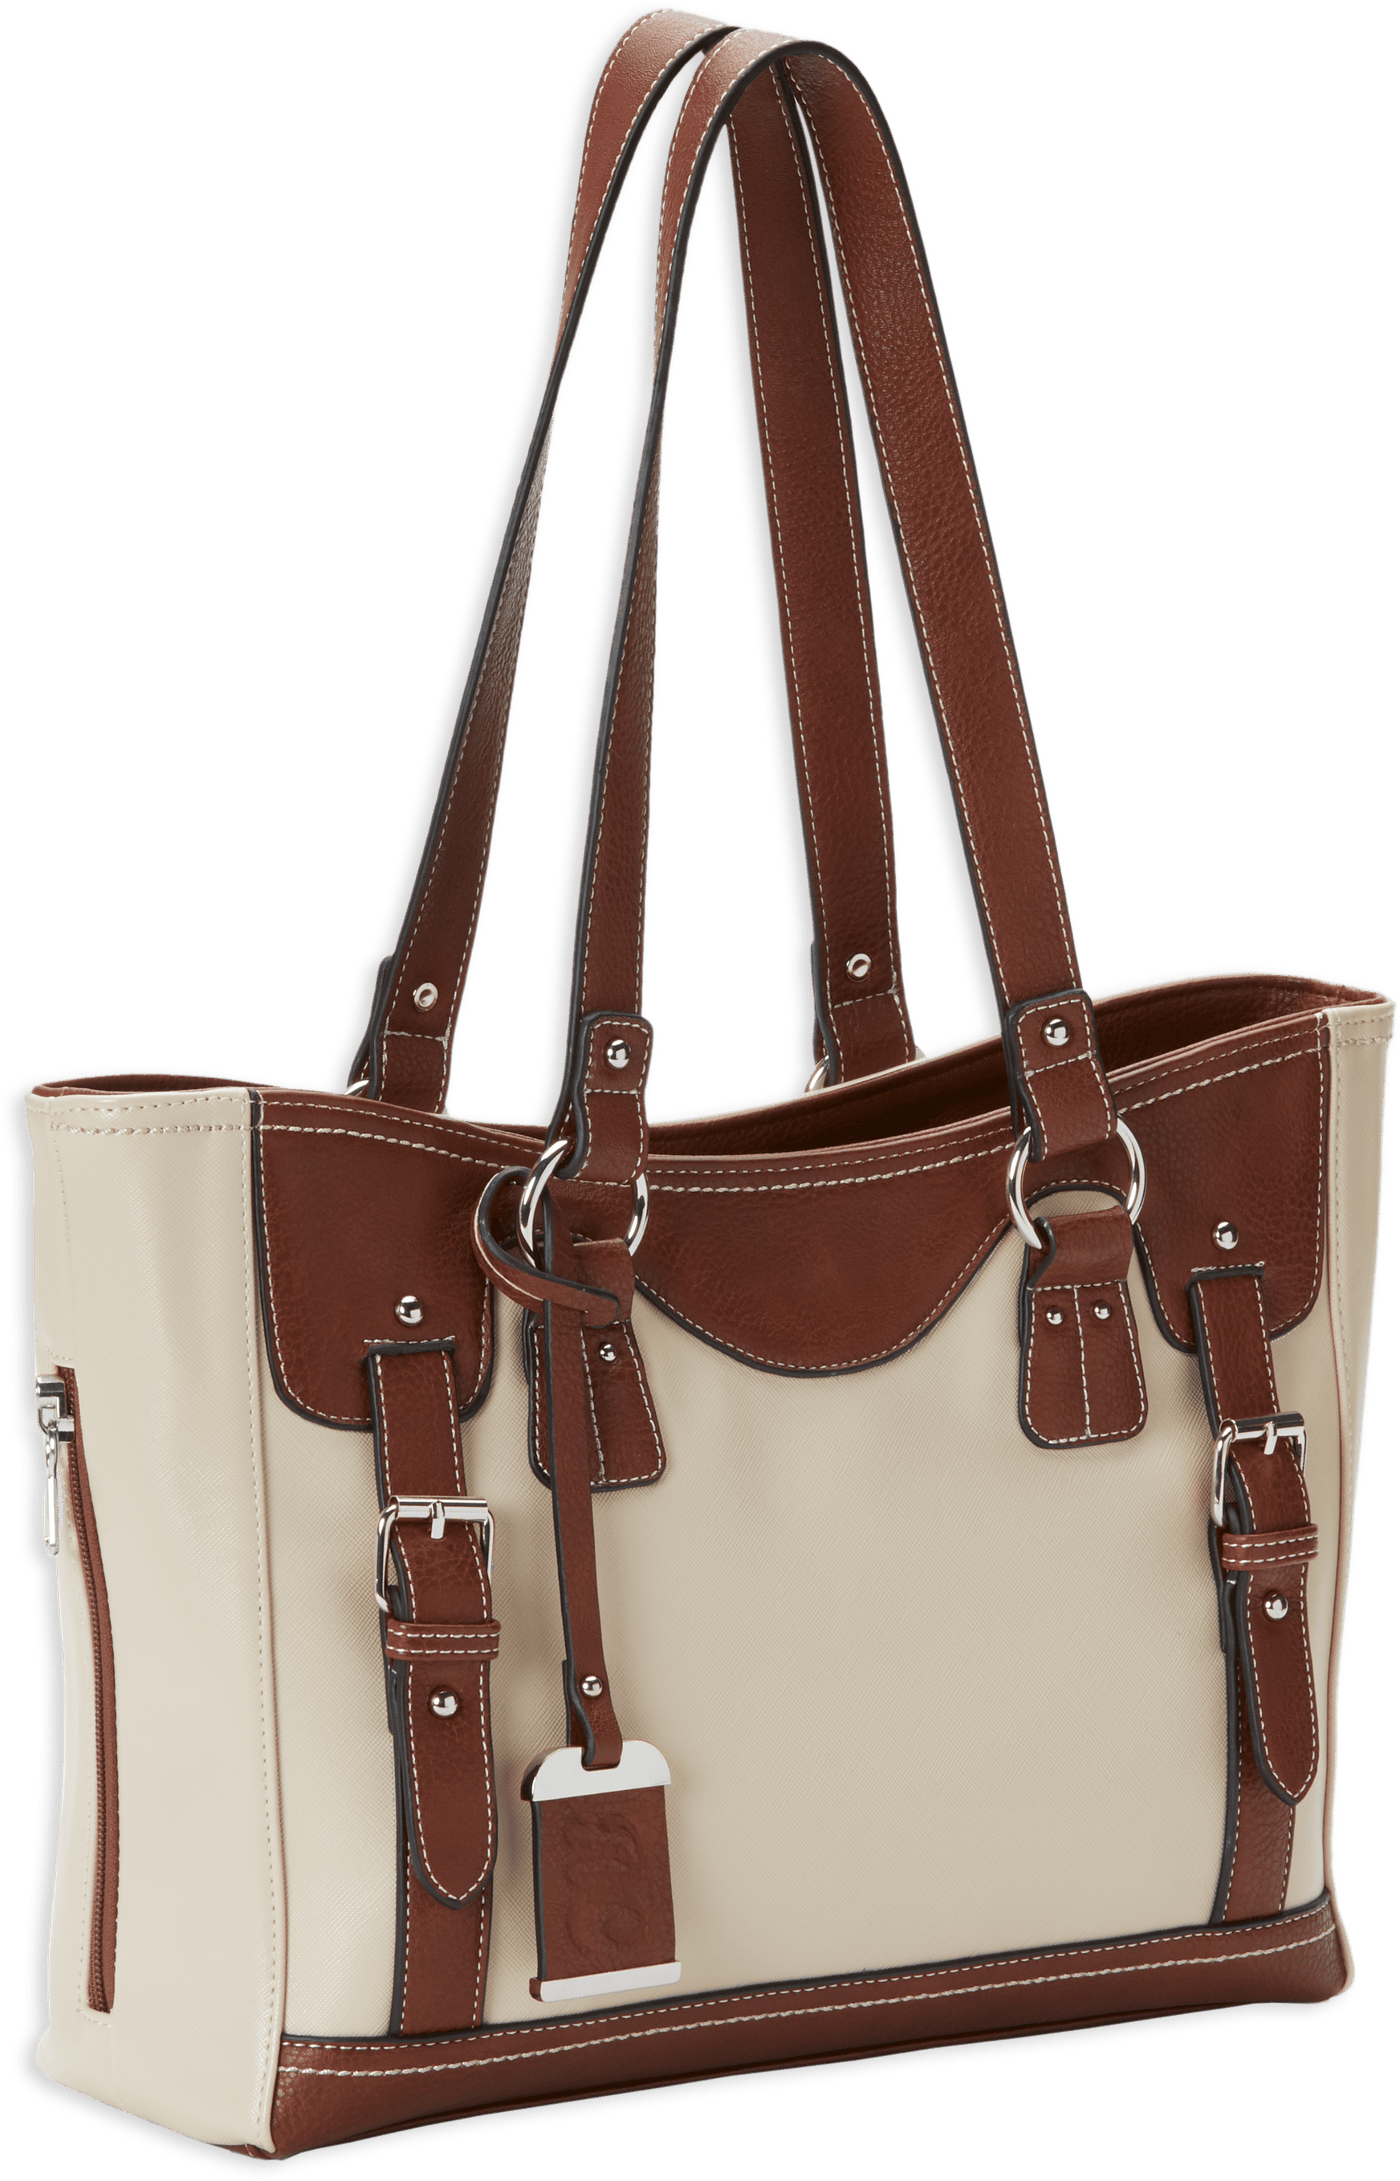 Bulldog Bulldog Concealed Carry Purse - W/ Holster Tote Style Sand/stn Concealed Carry Handbags